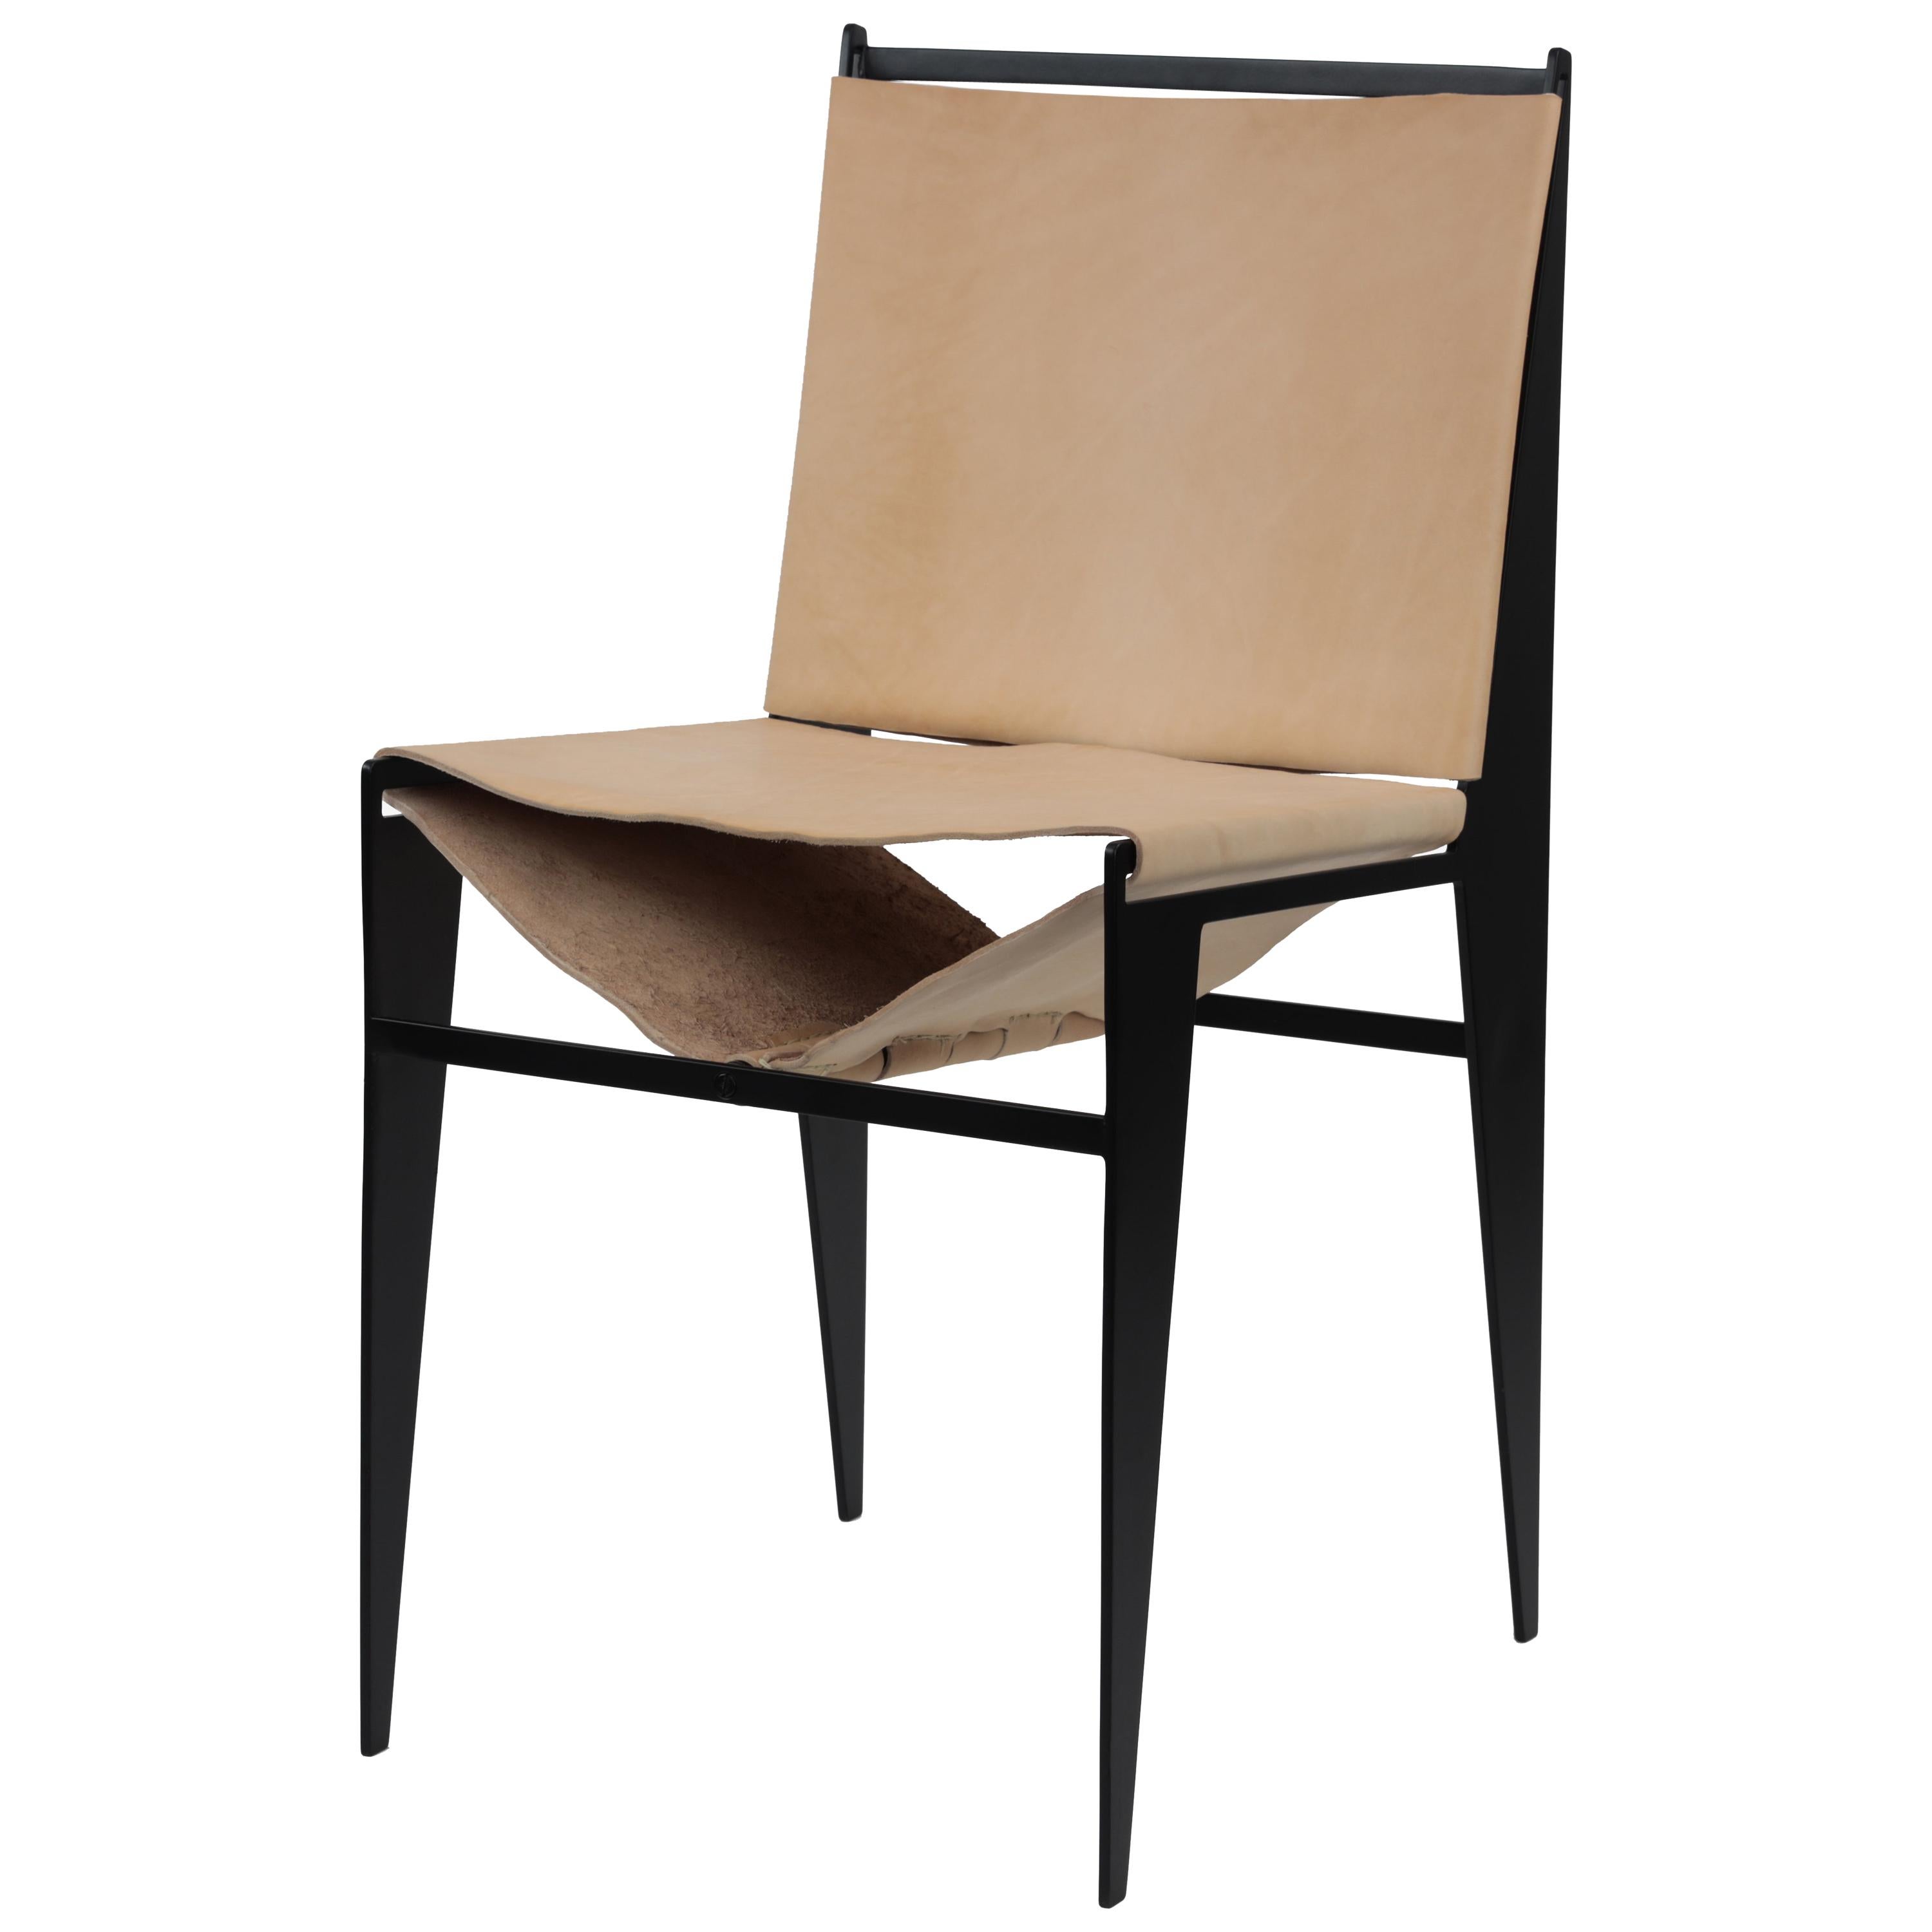 Icon Chair in Powder Coated Steel and Leather by Christopher Kreiling